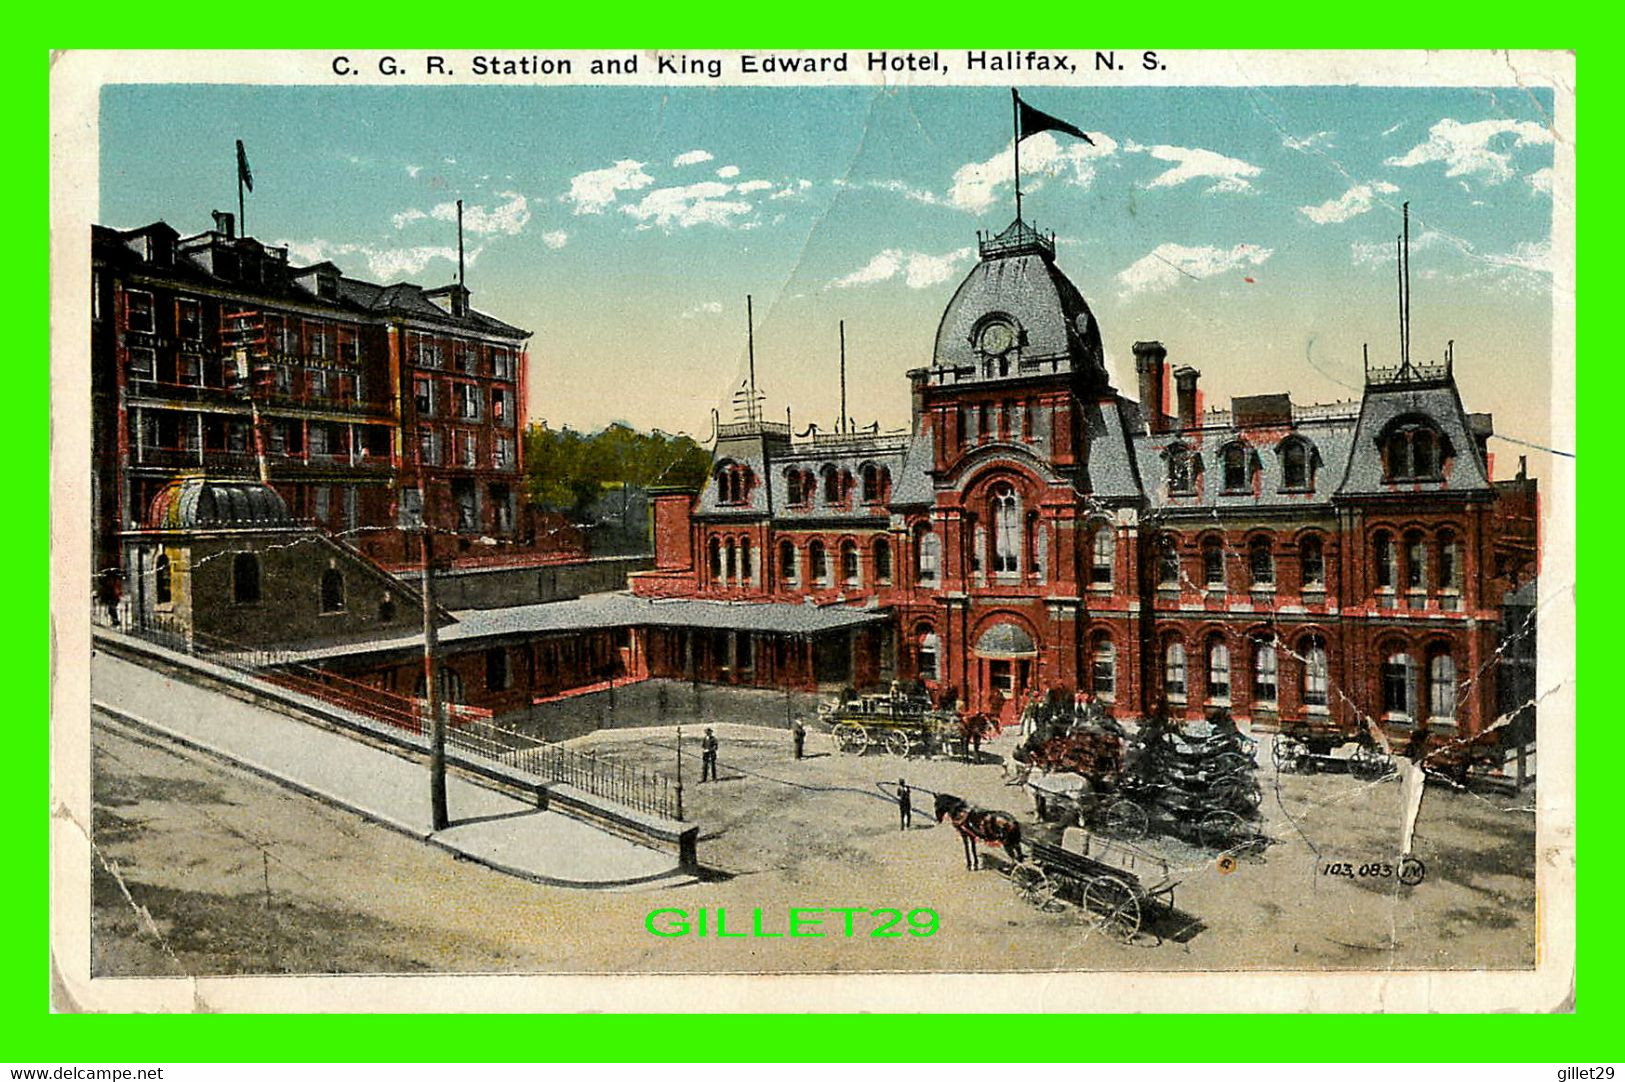 HALIFAX, NOVA SCOTIA - C.G. R. STATION AND KING EDWARD HOTEL - ANIMATED WITH CARRIAGES - THE VALENTINE & SONS - - Halifax